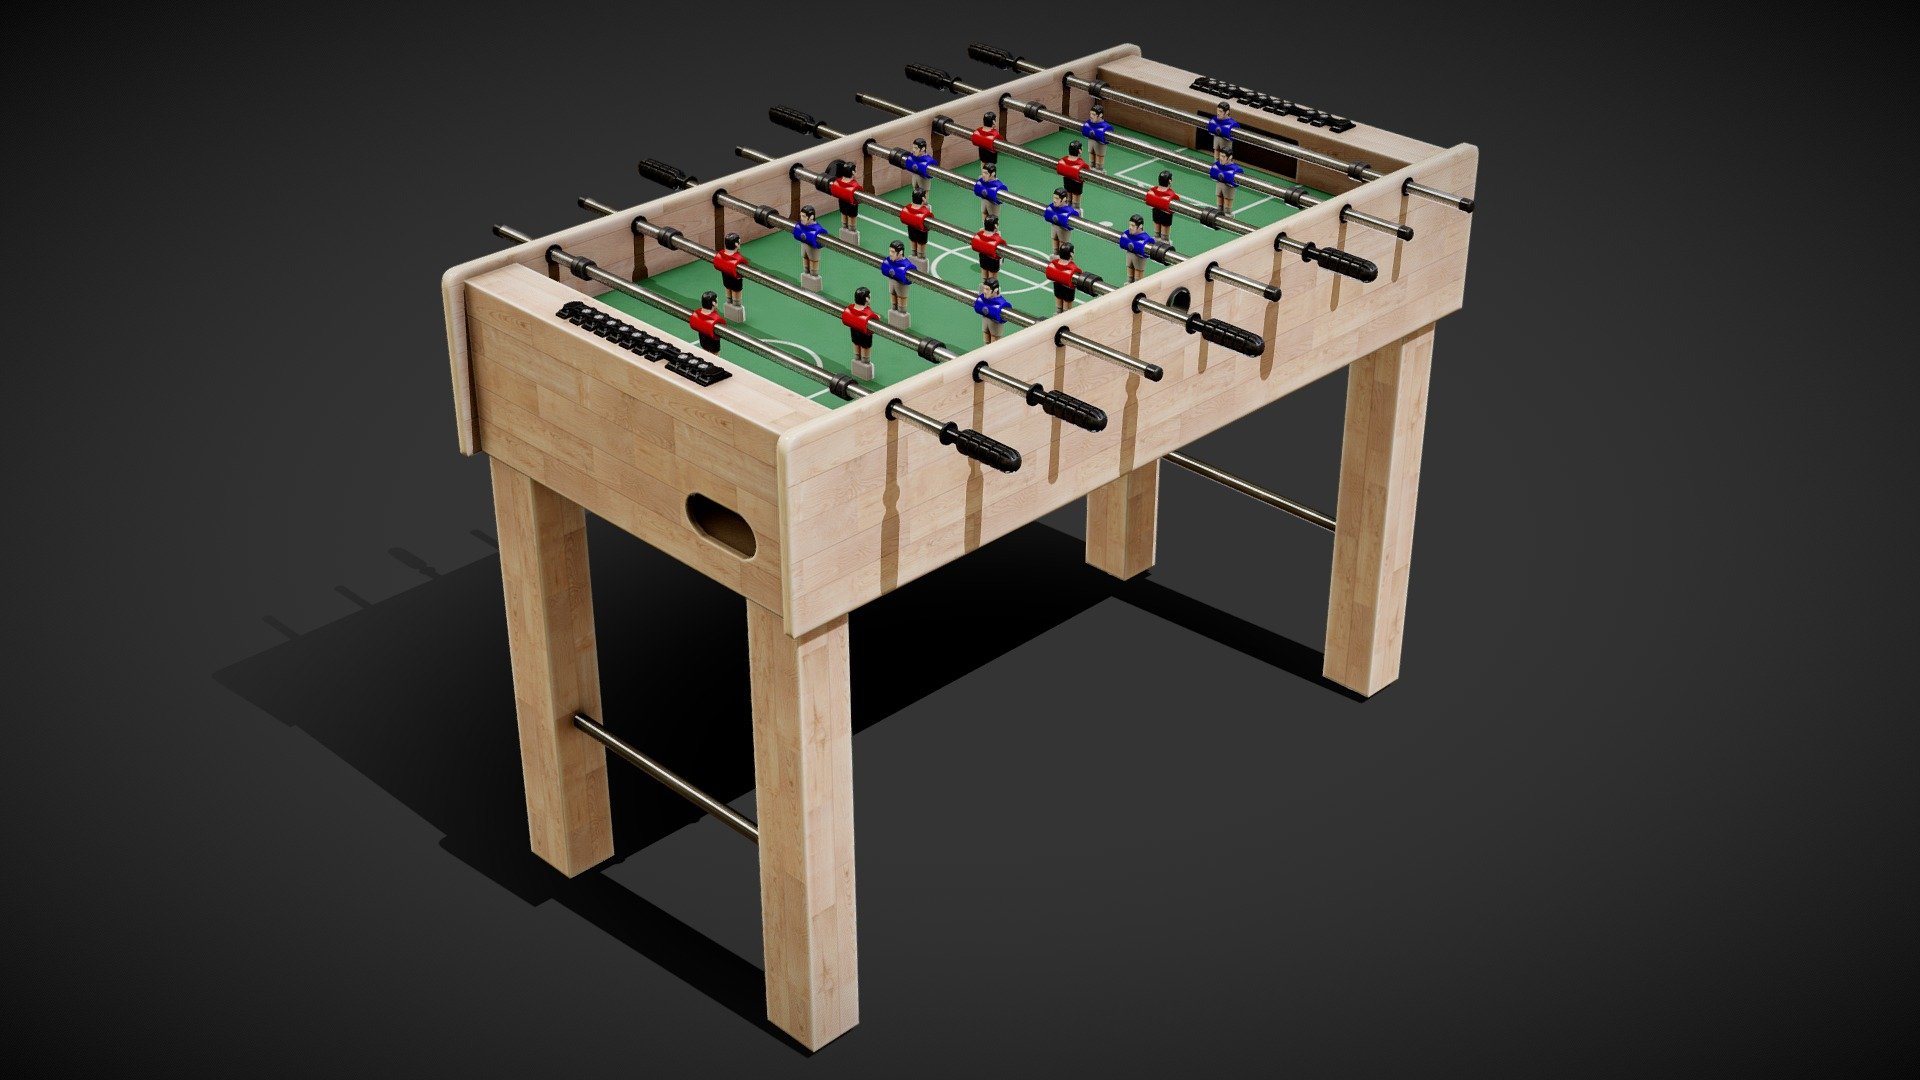 This game ready foosball table would be a great addition to your interactive indoor sports game. The striker bars are separated correctly to allow for itneractive elements.

✓ 4k

✓ LODs

✓ Unity &amp; Unreal Compatibility

LOD0 = 50,124 tris | LOD1 = 36,762 tris | LOD2 = 18,328 tris | LOD3 = 1,512

The model shown here is LOD0, be sure to download the ‘Additional File’ as it contains the FBX with all LODs. In that file, you can find additional textures and unity packages. If you require a format that isn’t provided, please reach out to us 3d model